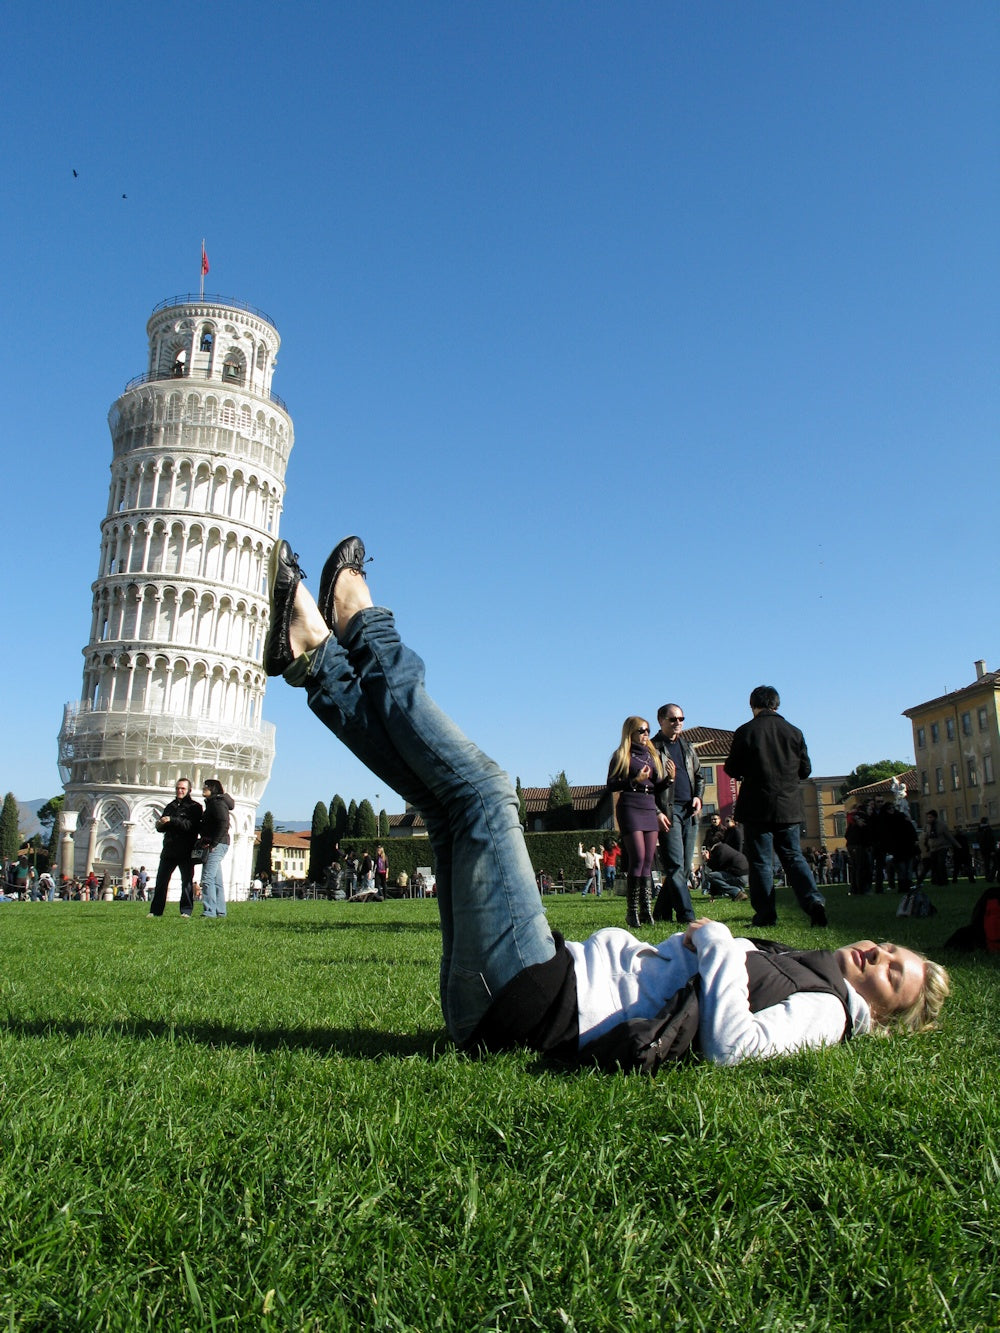 Forced perspective photo of a person holding up the Leaning Tower of Pisa with their legs